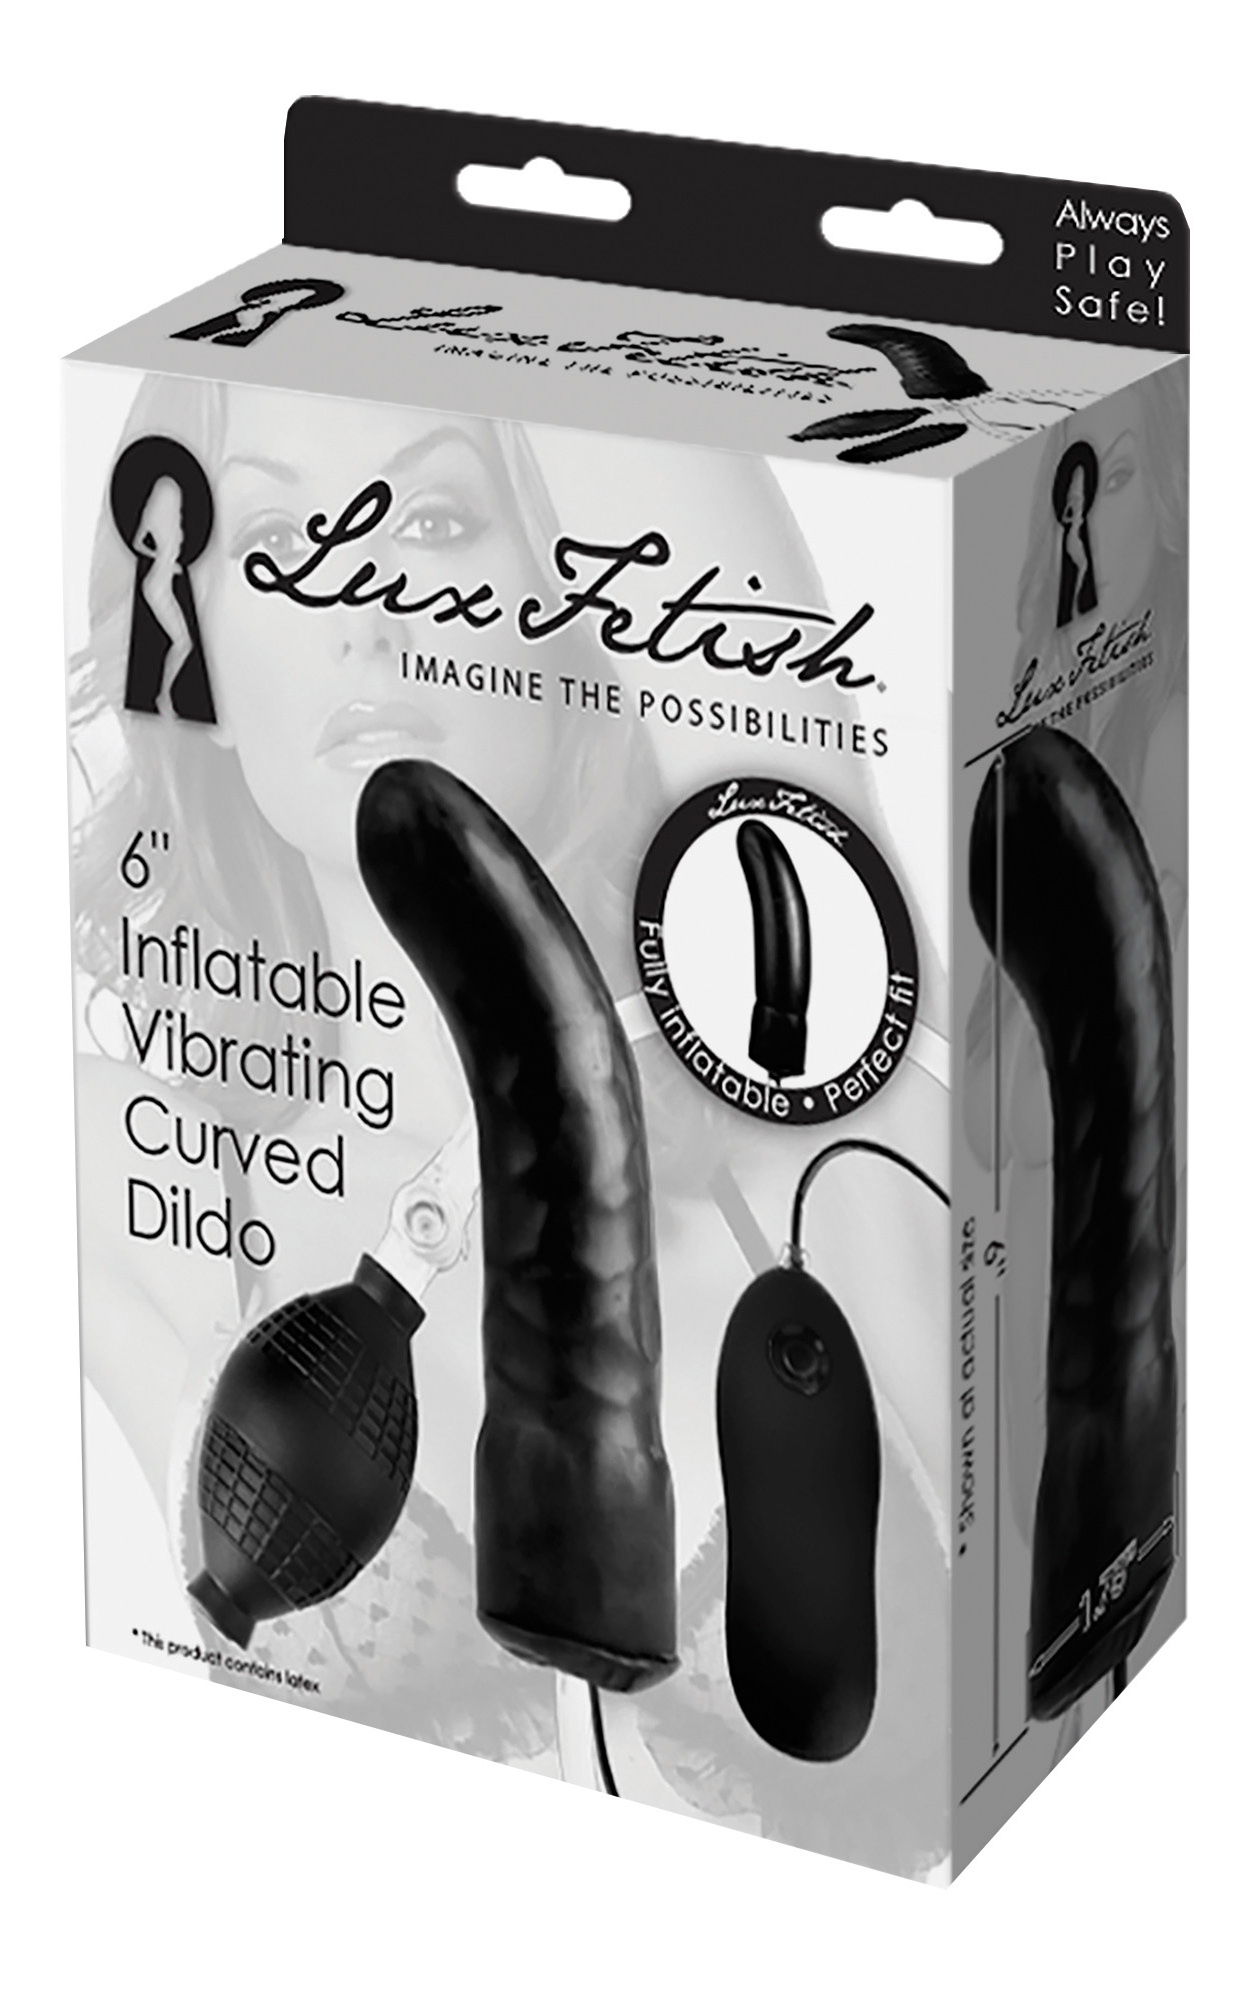 LUX FETISH 6' Inflatbale Vibrating Curved Dildo